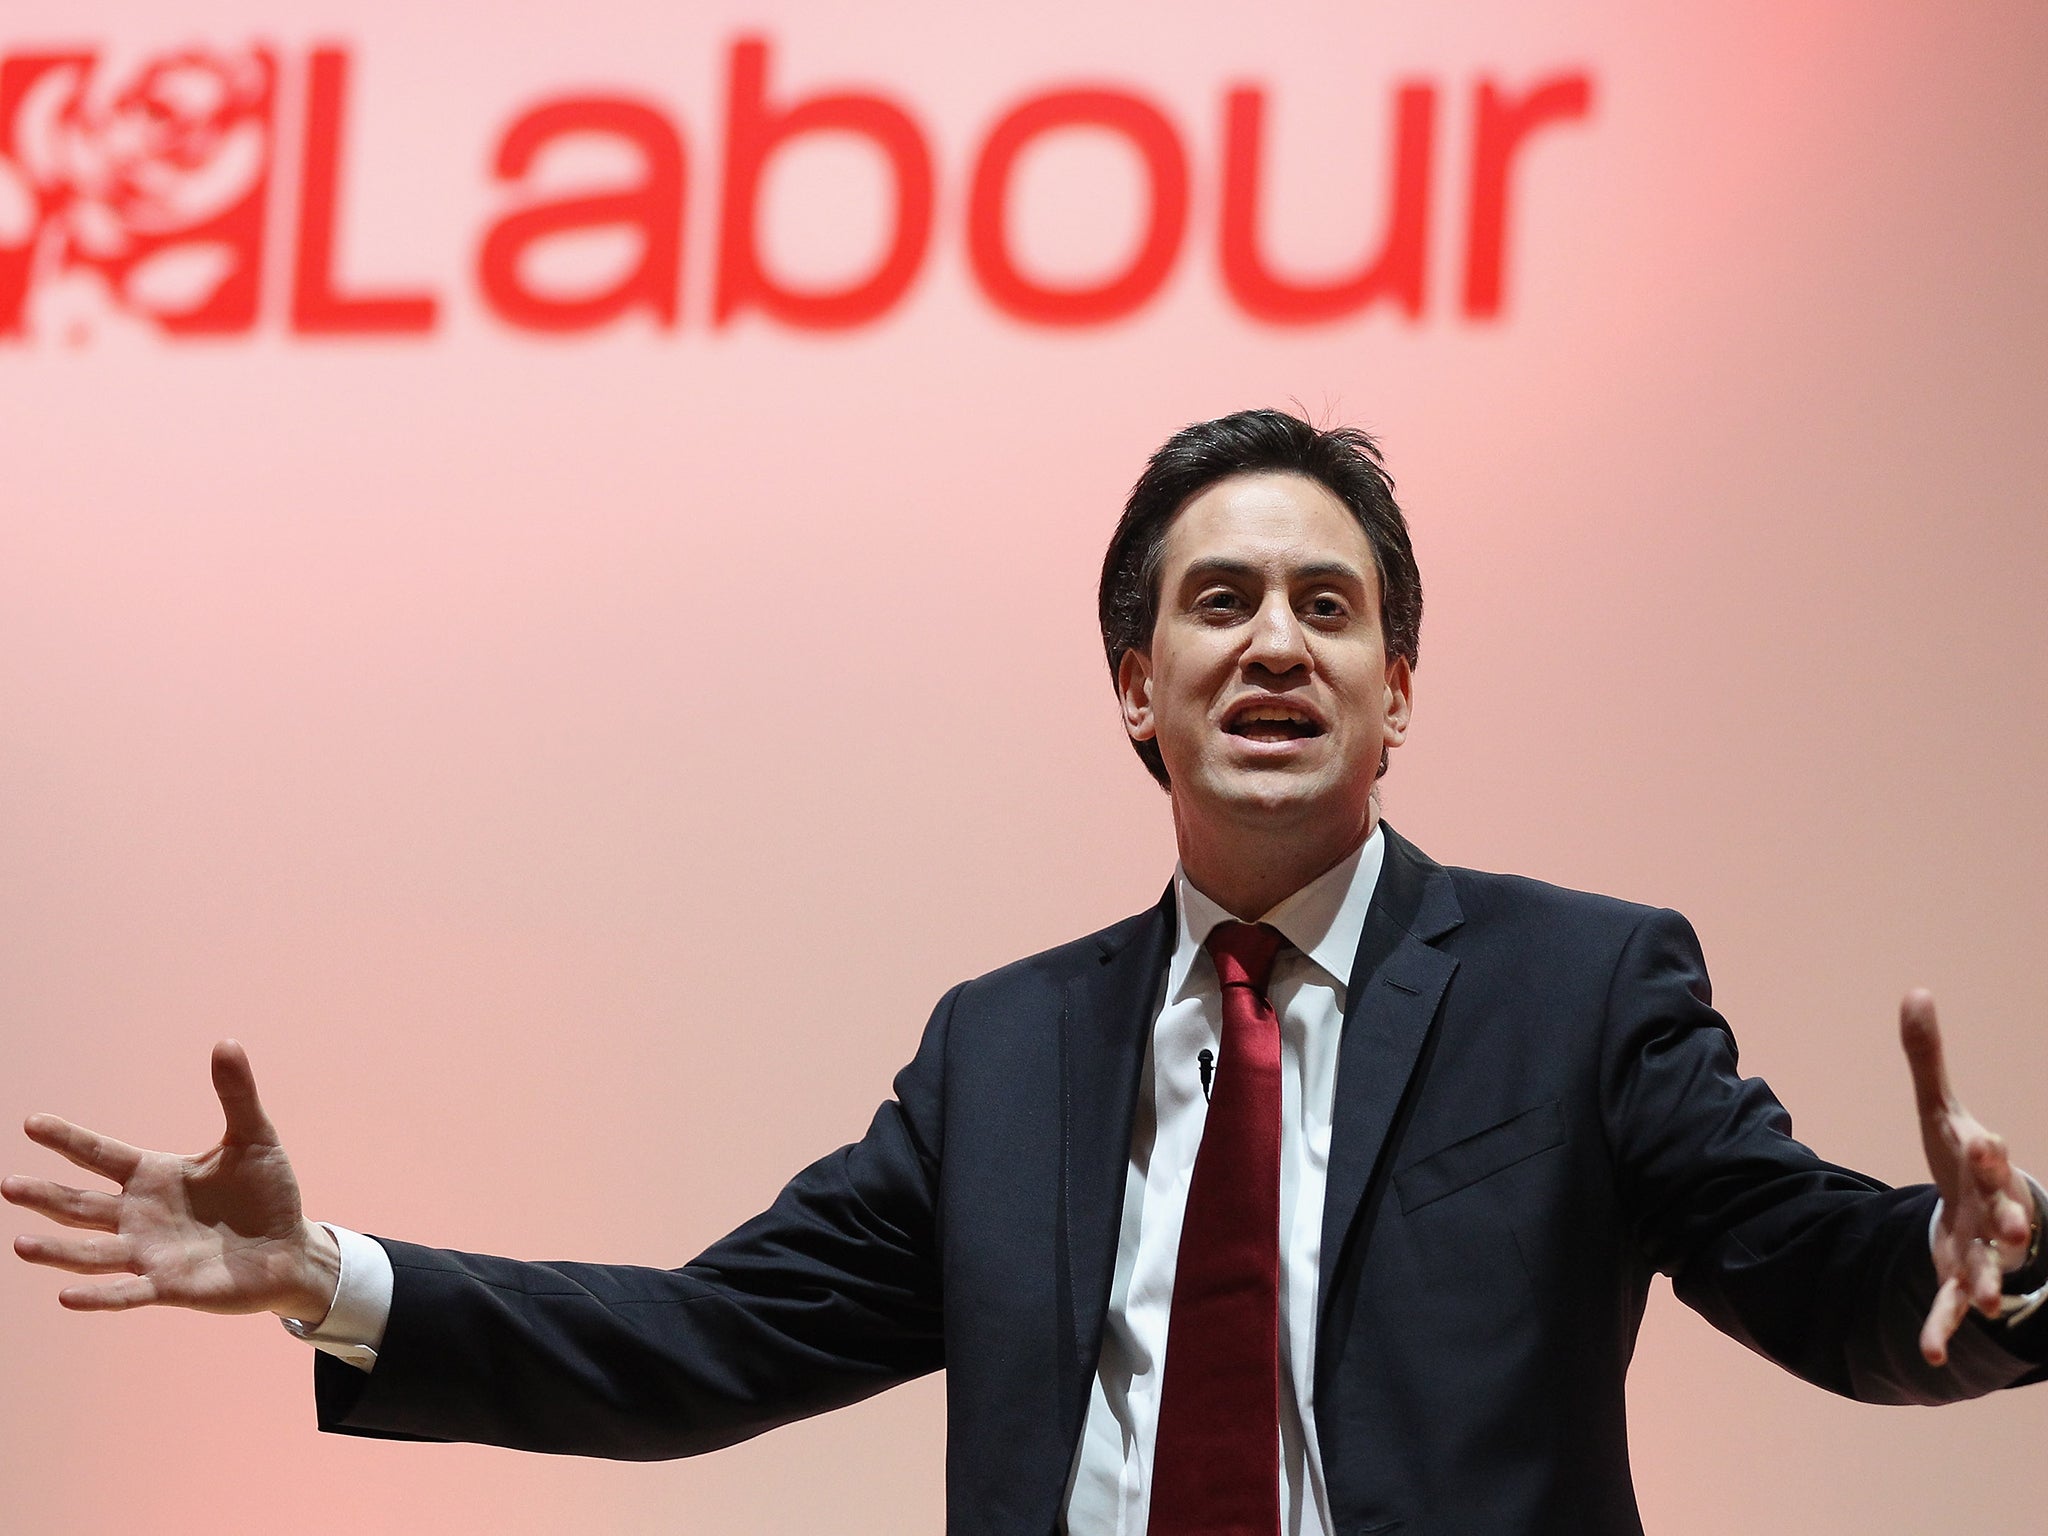 Attention has shifted to how a Miliband-led administration would govern the country